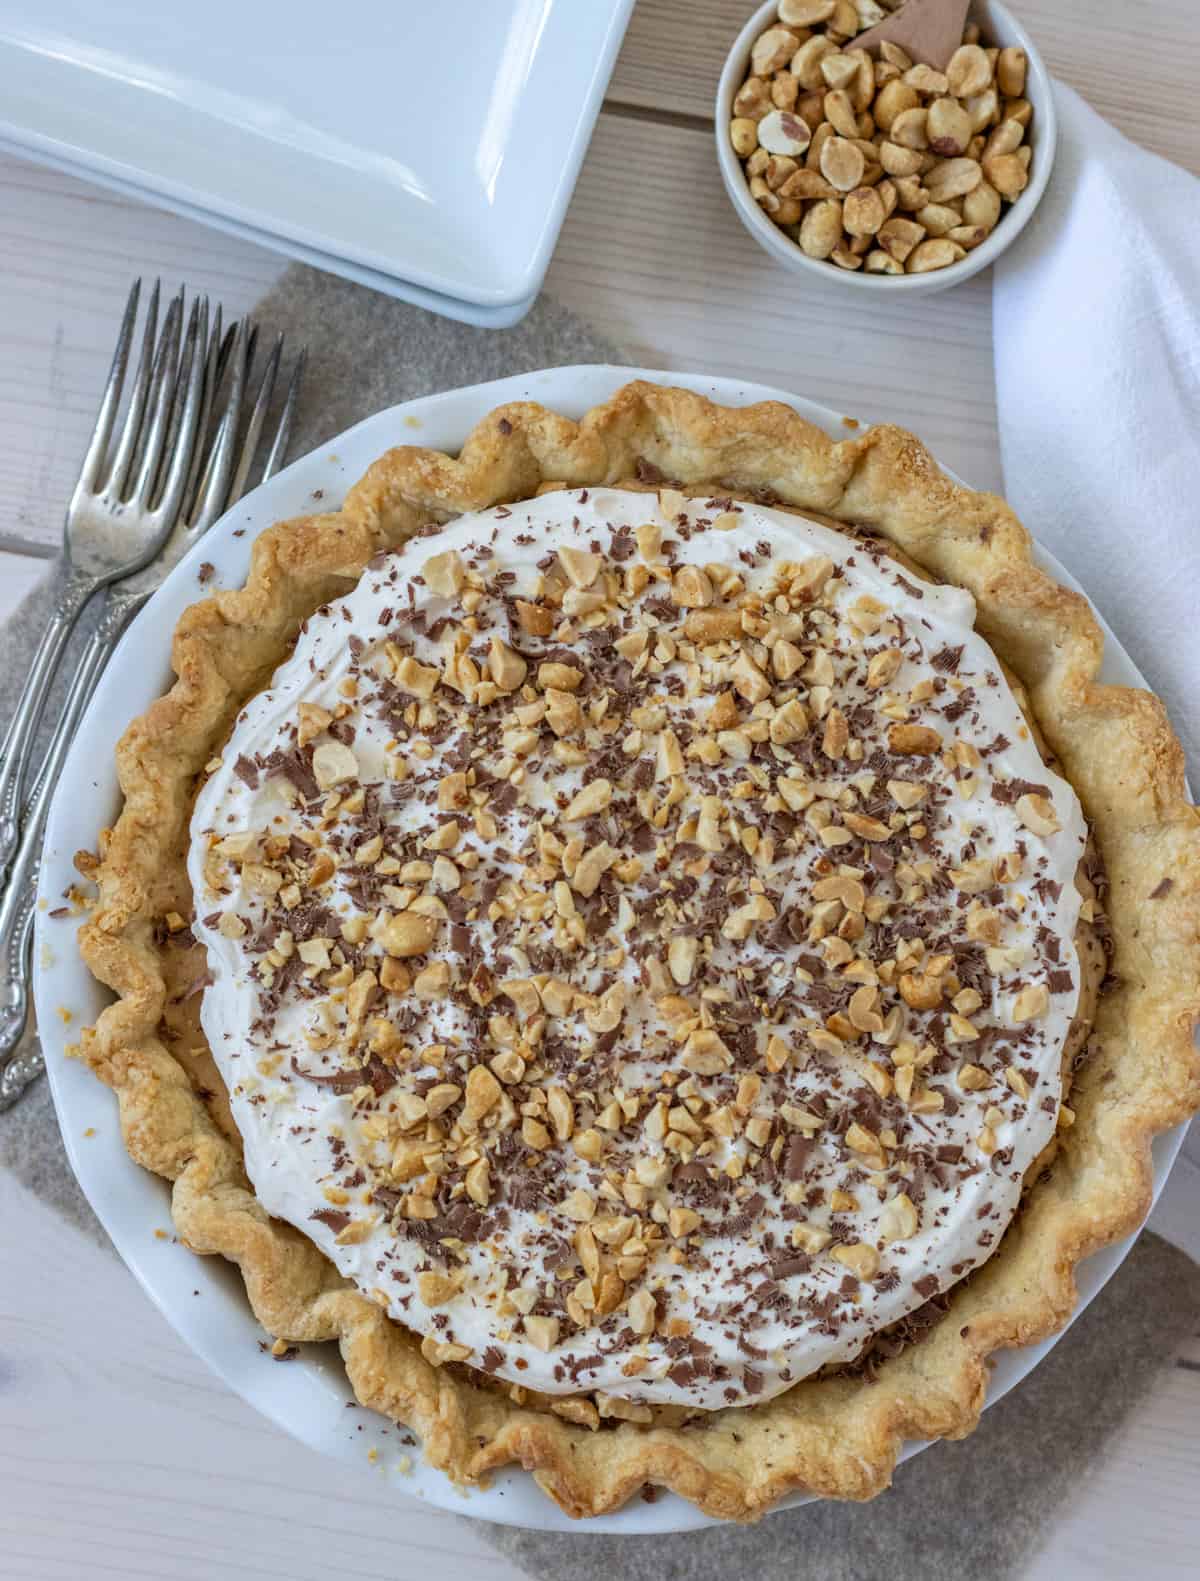 Overhead view of a peanut butter pie topped with whipped cream, chocolate shavings, and peanuts with forks, a plate and bowl of peanuts off to the side.